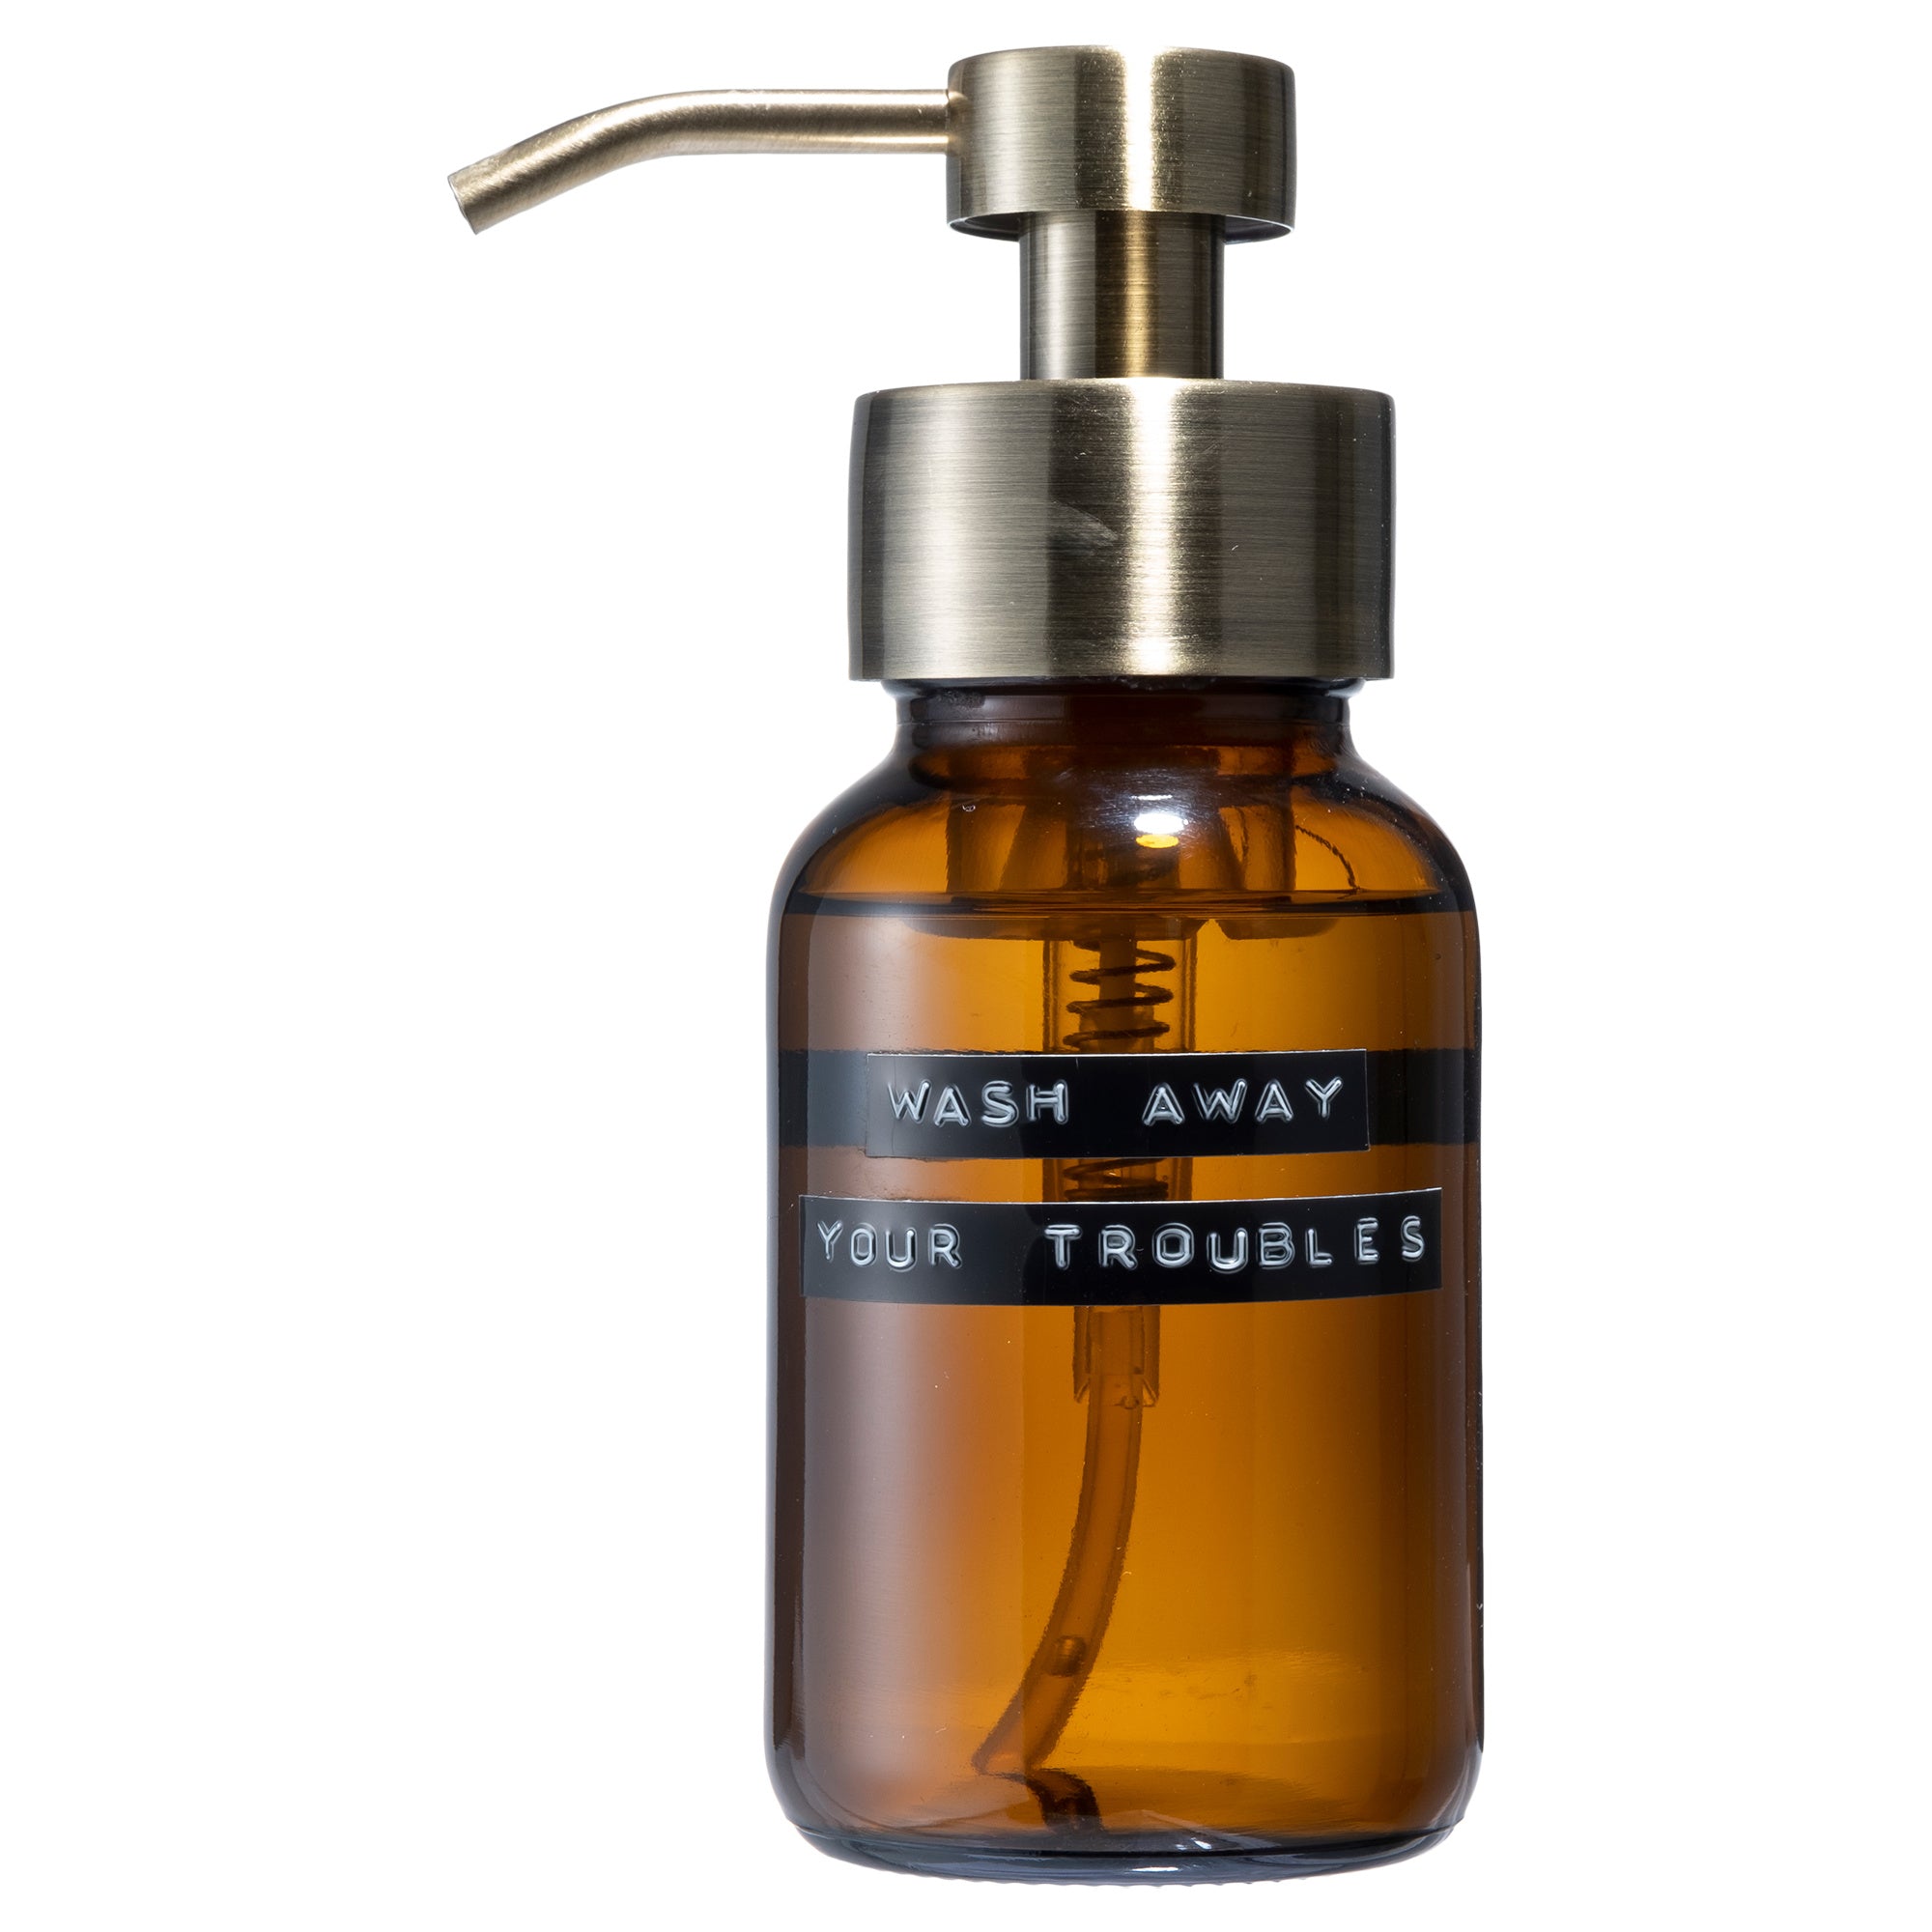 Body Wash 250ml "Wash Away Your Troubles" - Brown + Brass